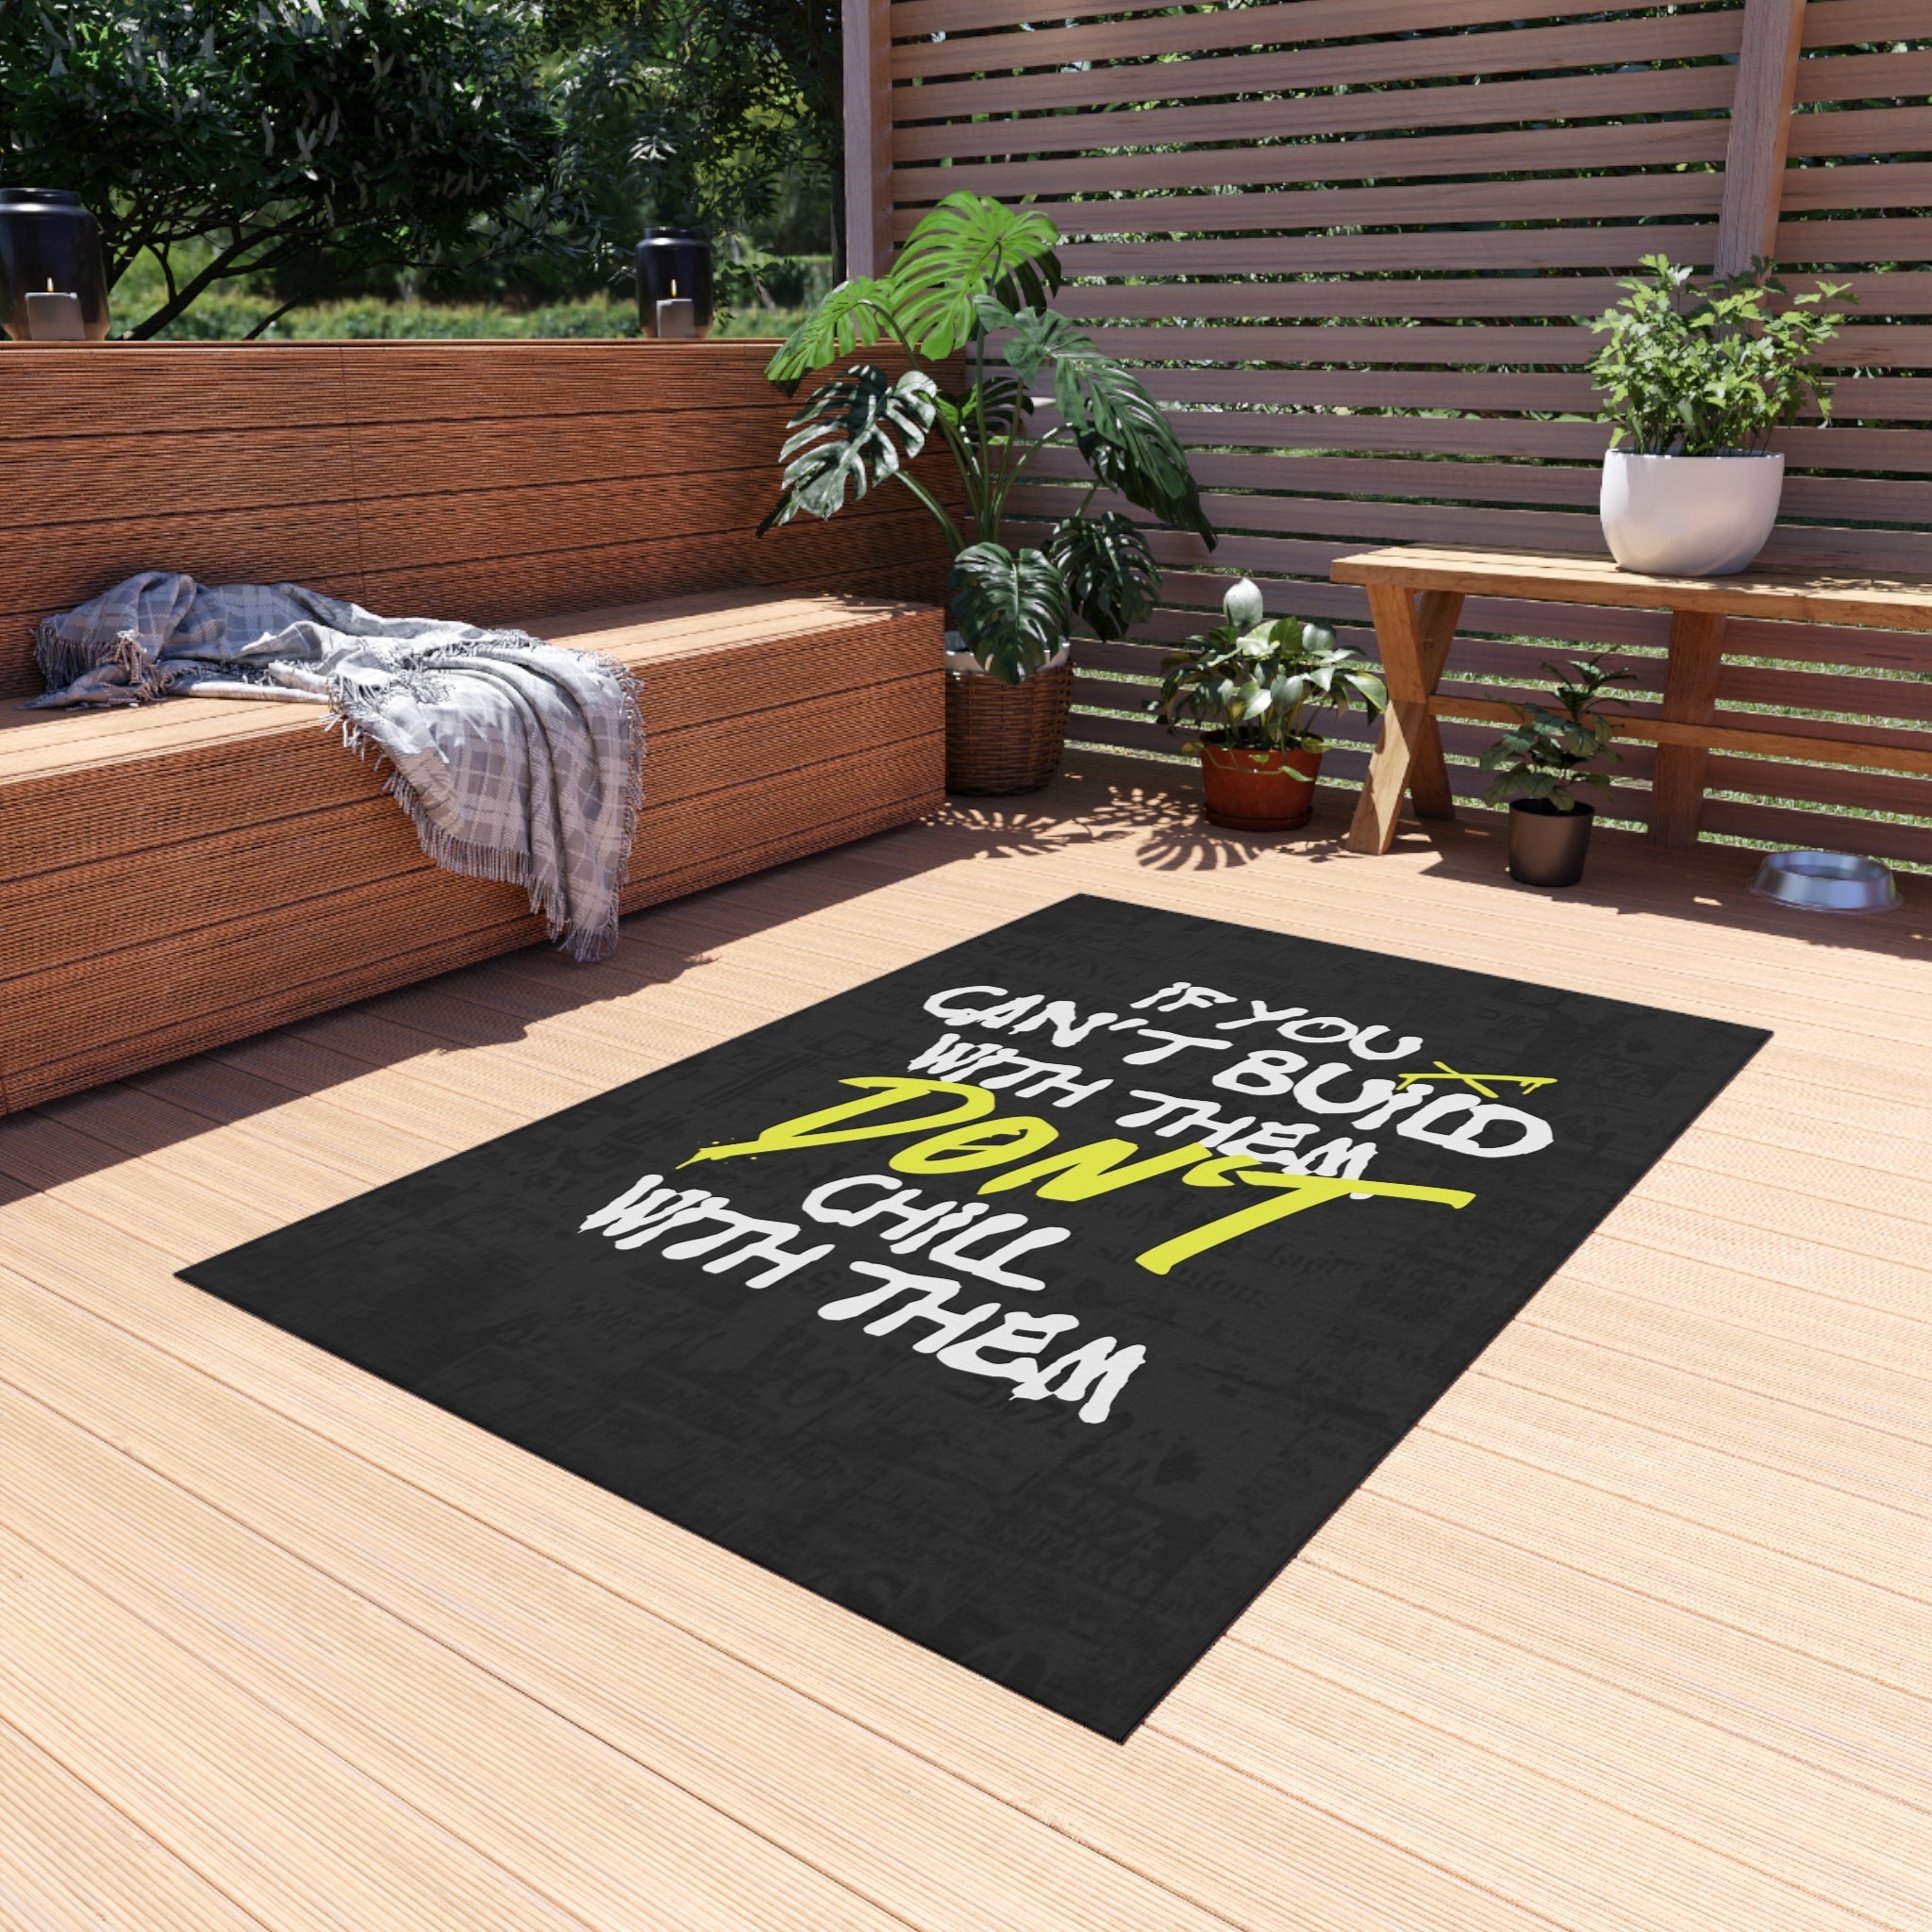 If You Can't Build With Them Don't Chill With Them Rug - REBHORN DESIGN